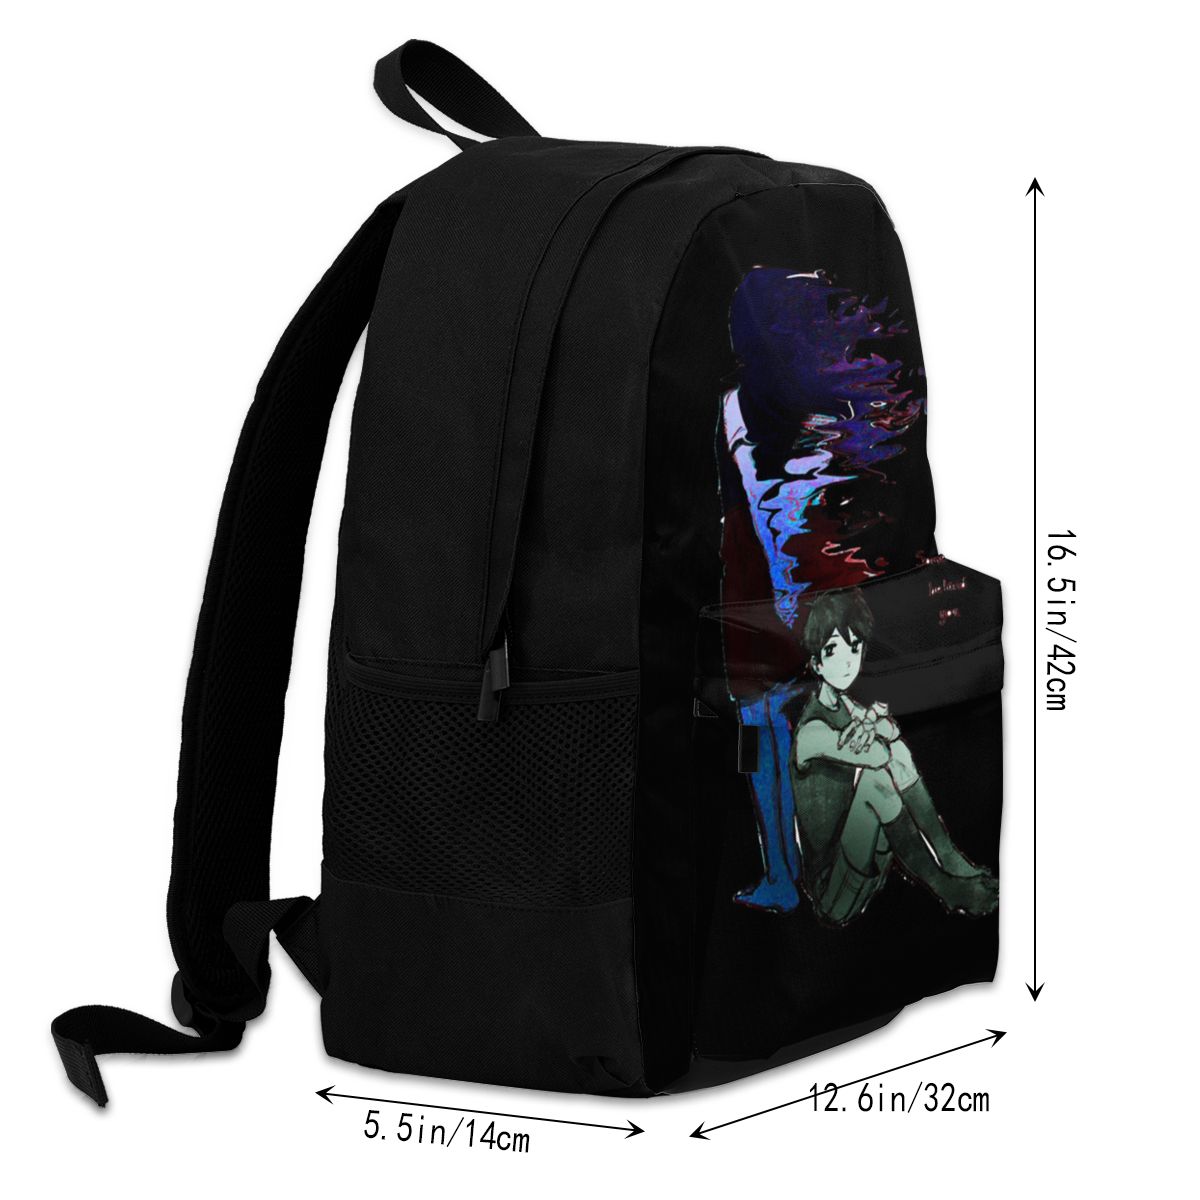 Omori Some Thing Behind You Backpacks Video Game Breathable Streetwear Polyester Backpack Cycling Youth Bags 2 - Omori Plush